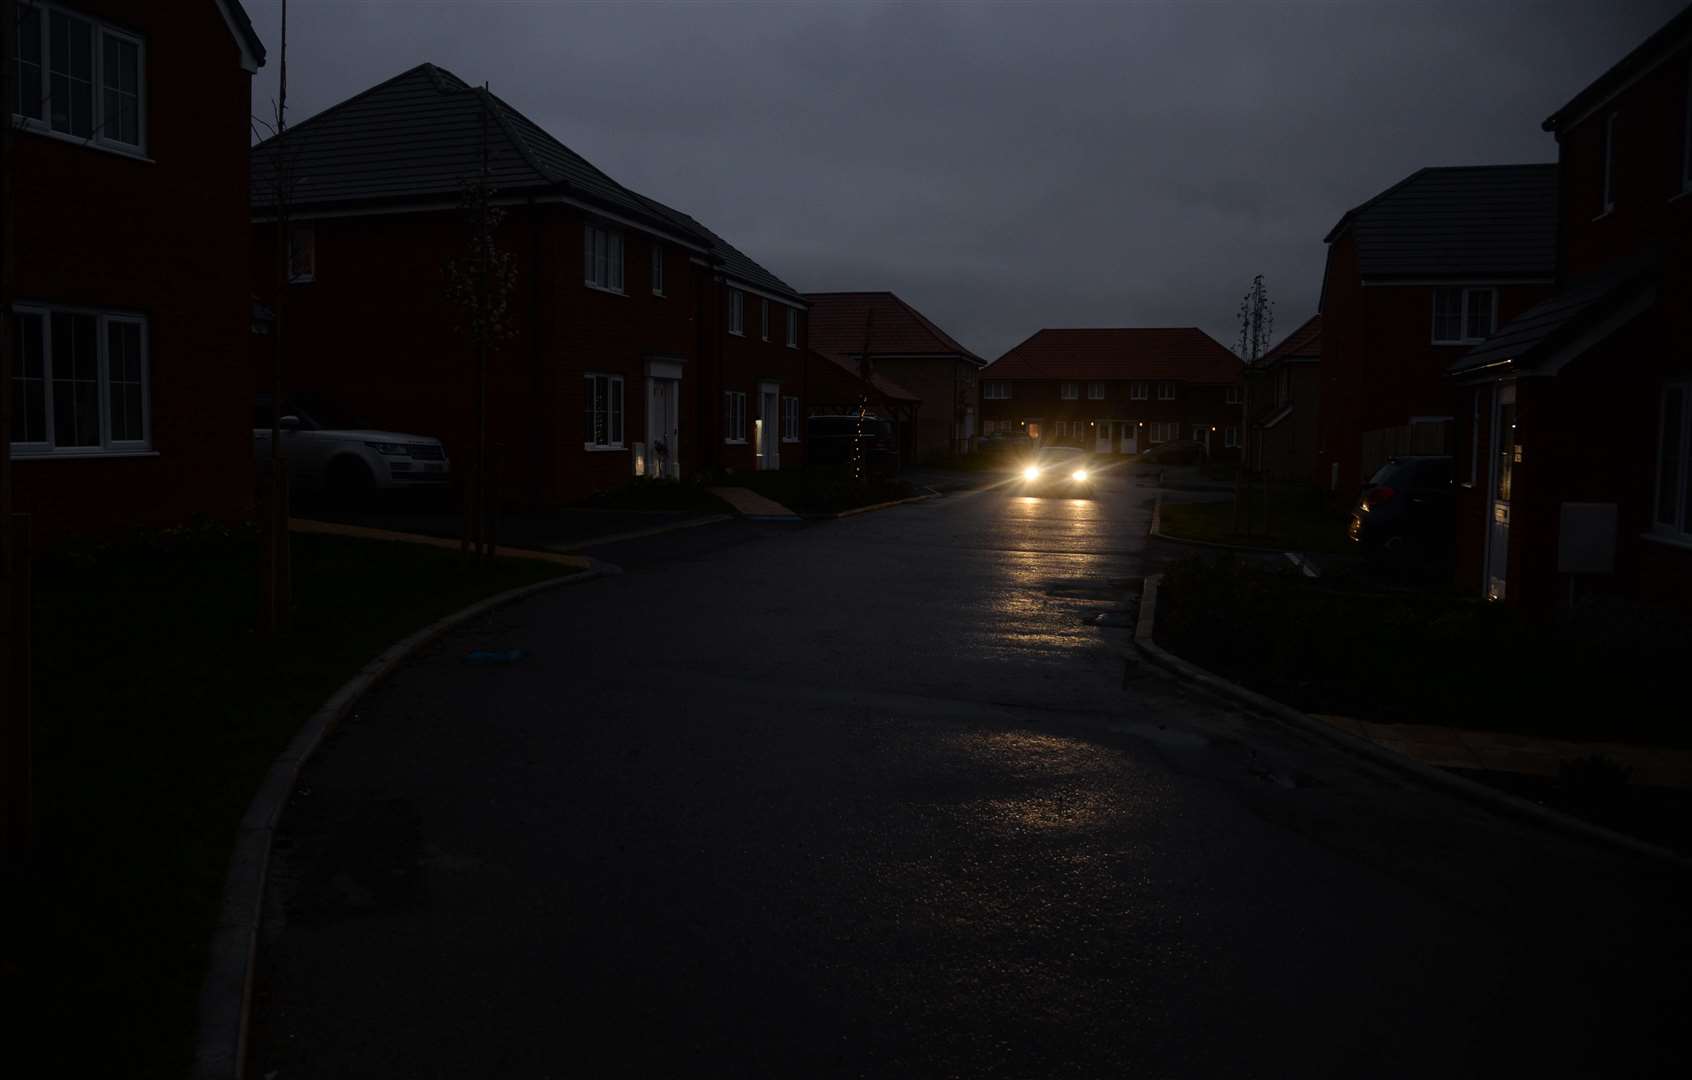 Residents say the estate is "pitch black" once the sun sets